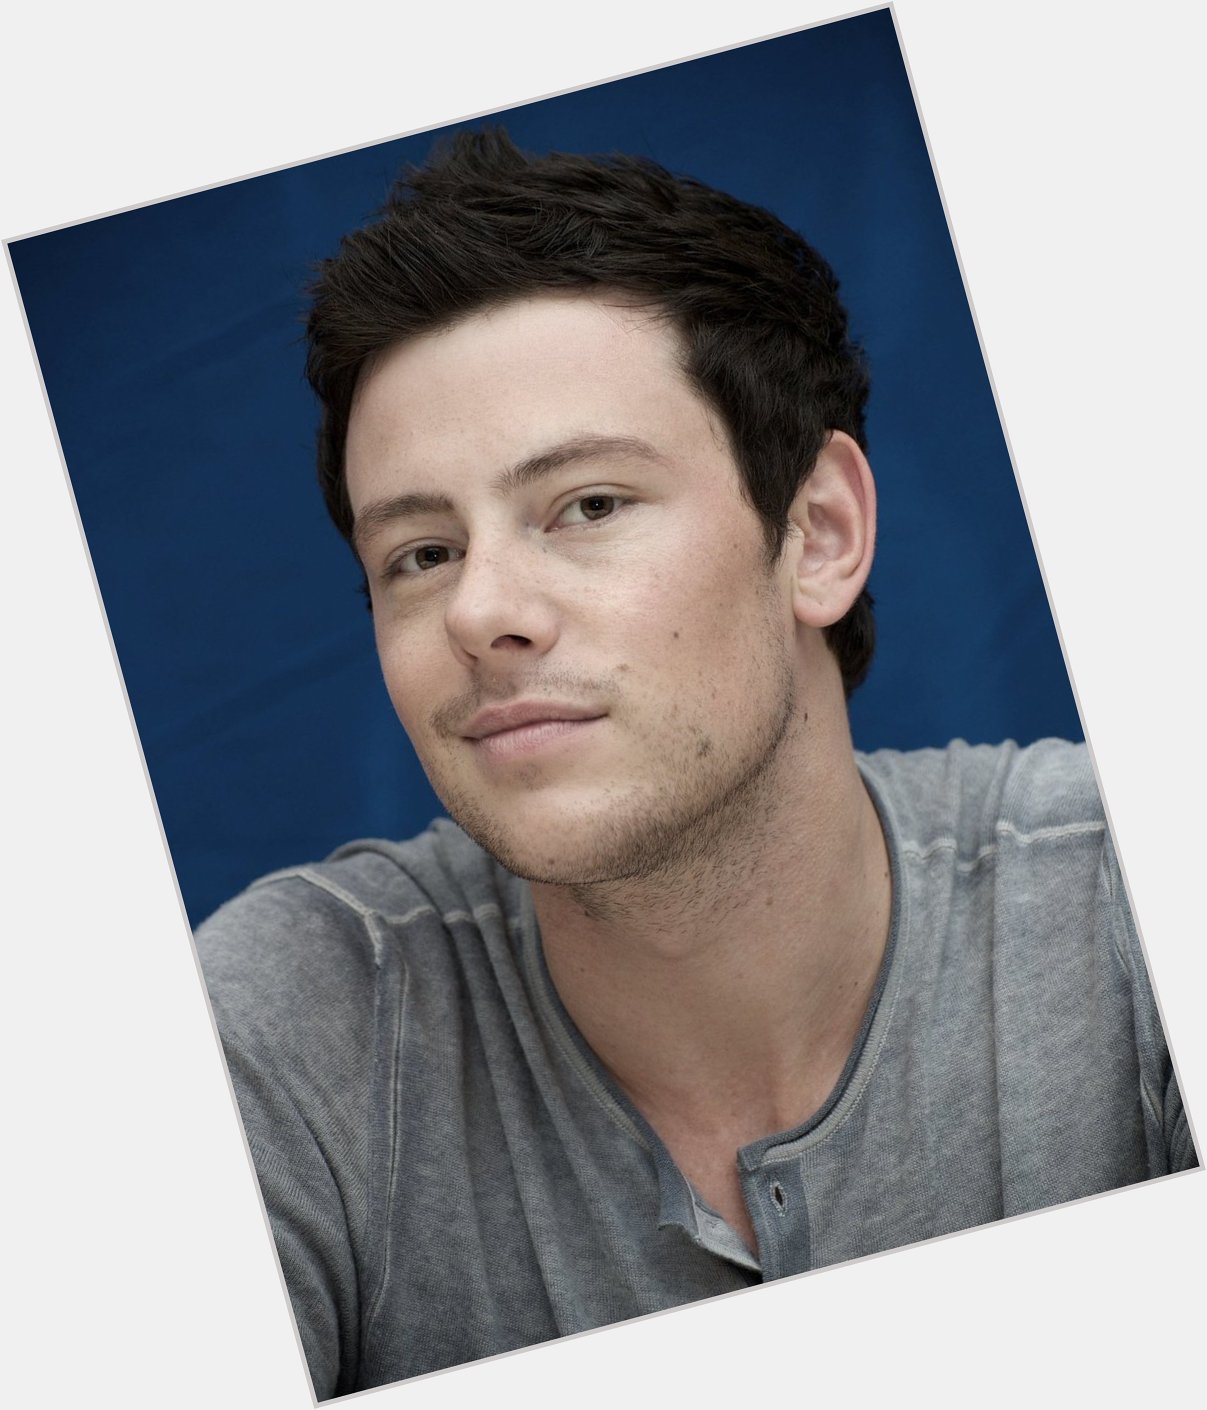 Happy birthday star, miss you. 
cory monteith forever! 